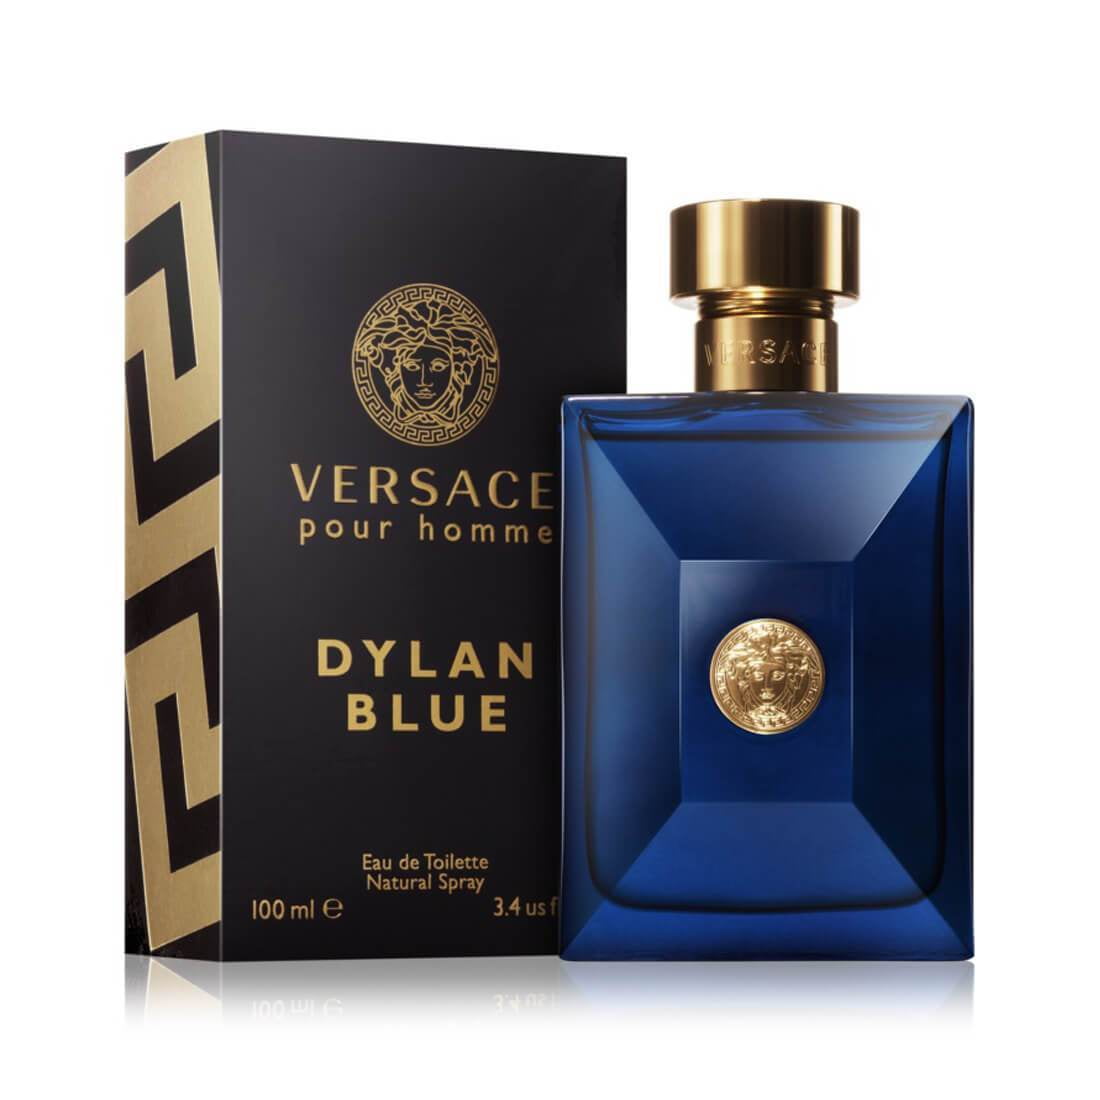 Versace Pour Homme Dylan Blue by Versace 3.4 oz EDT Cologne for